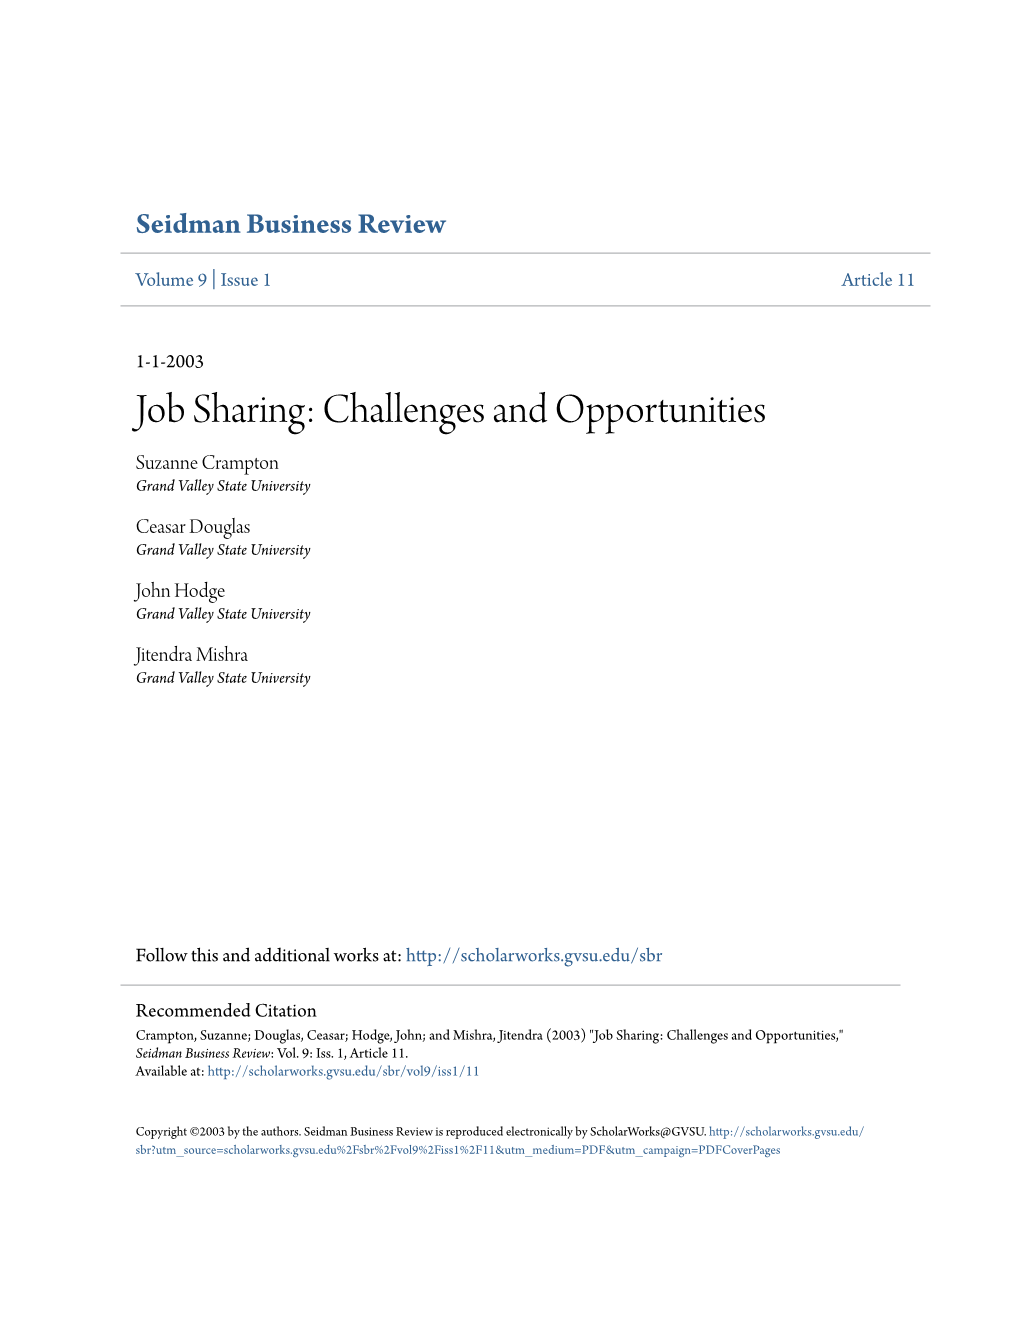 Job Sharing: Challenges and Opportunities Suzanne Crampton Grand Valley State University